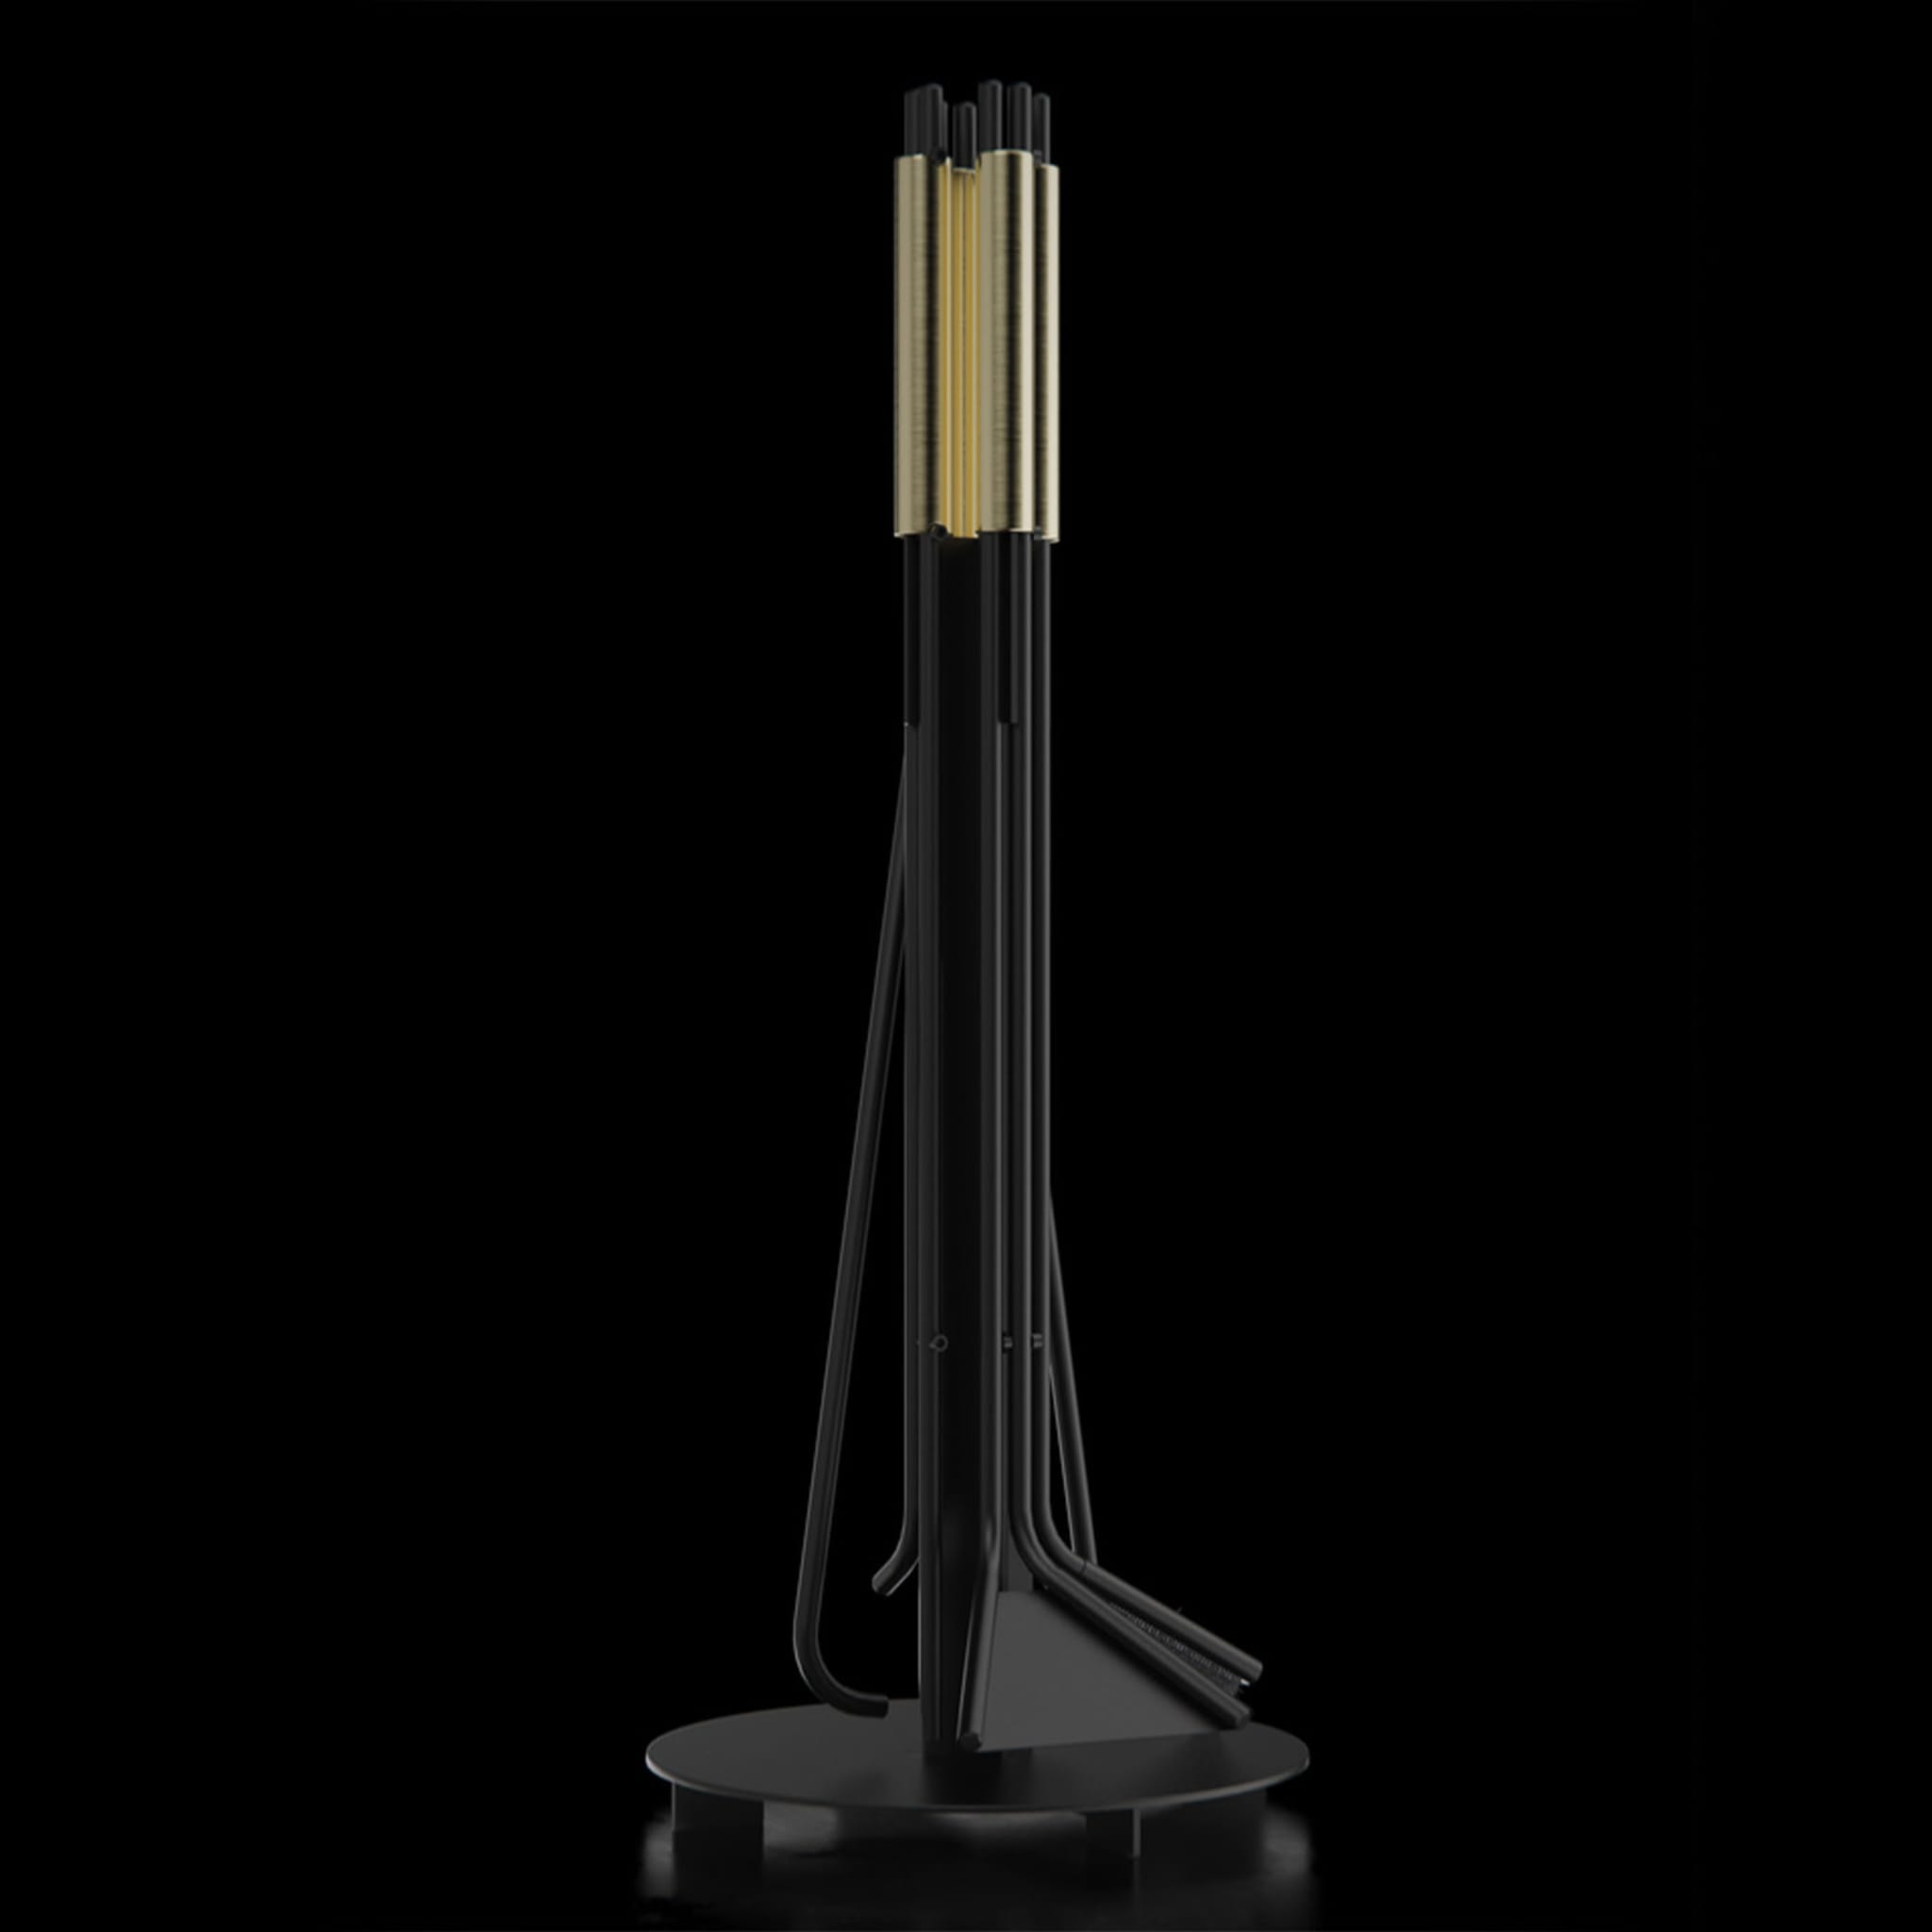 ED001 Black and Brass Fireplace Tools - Alternative view 4